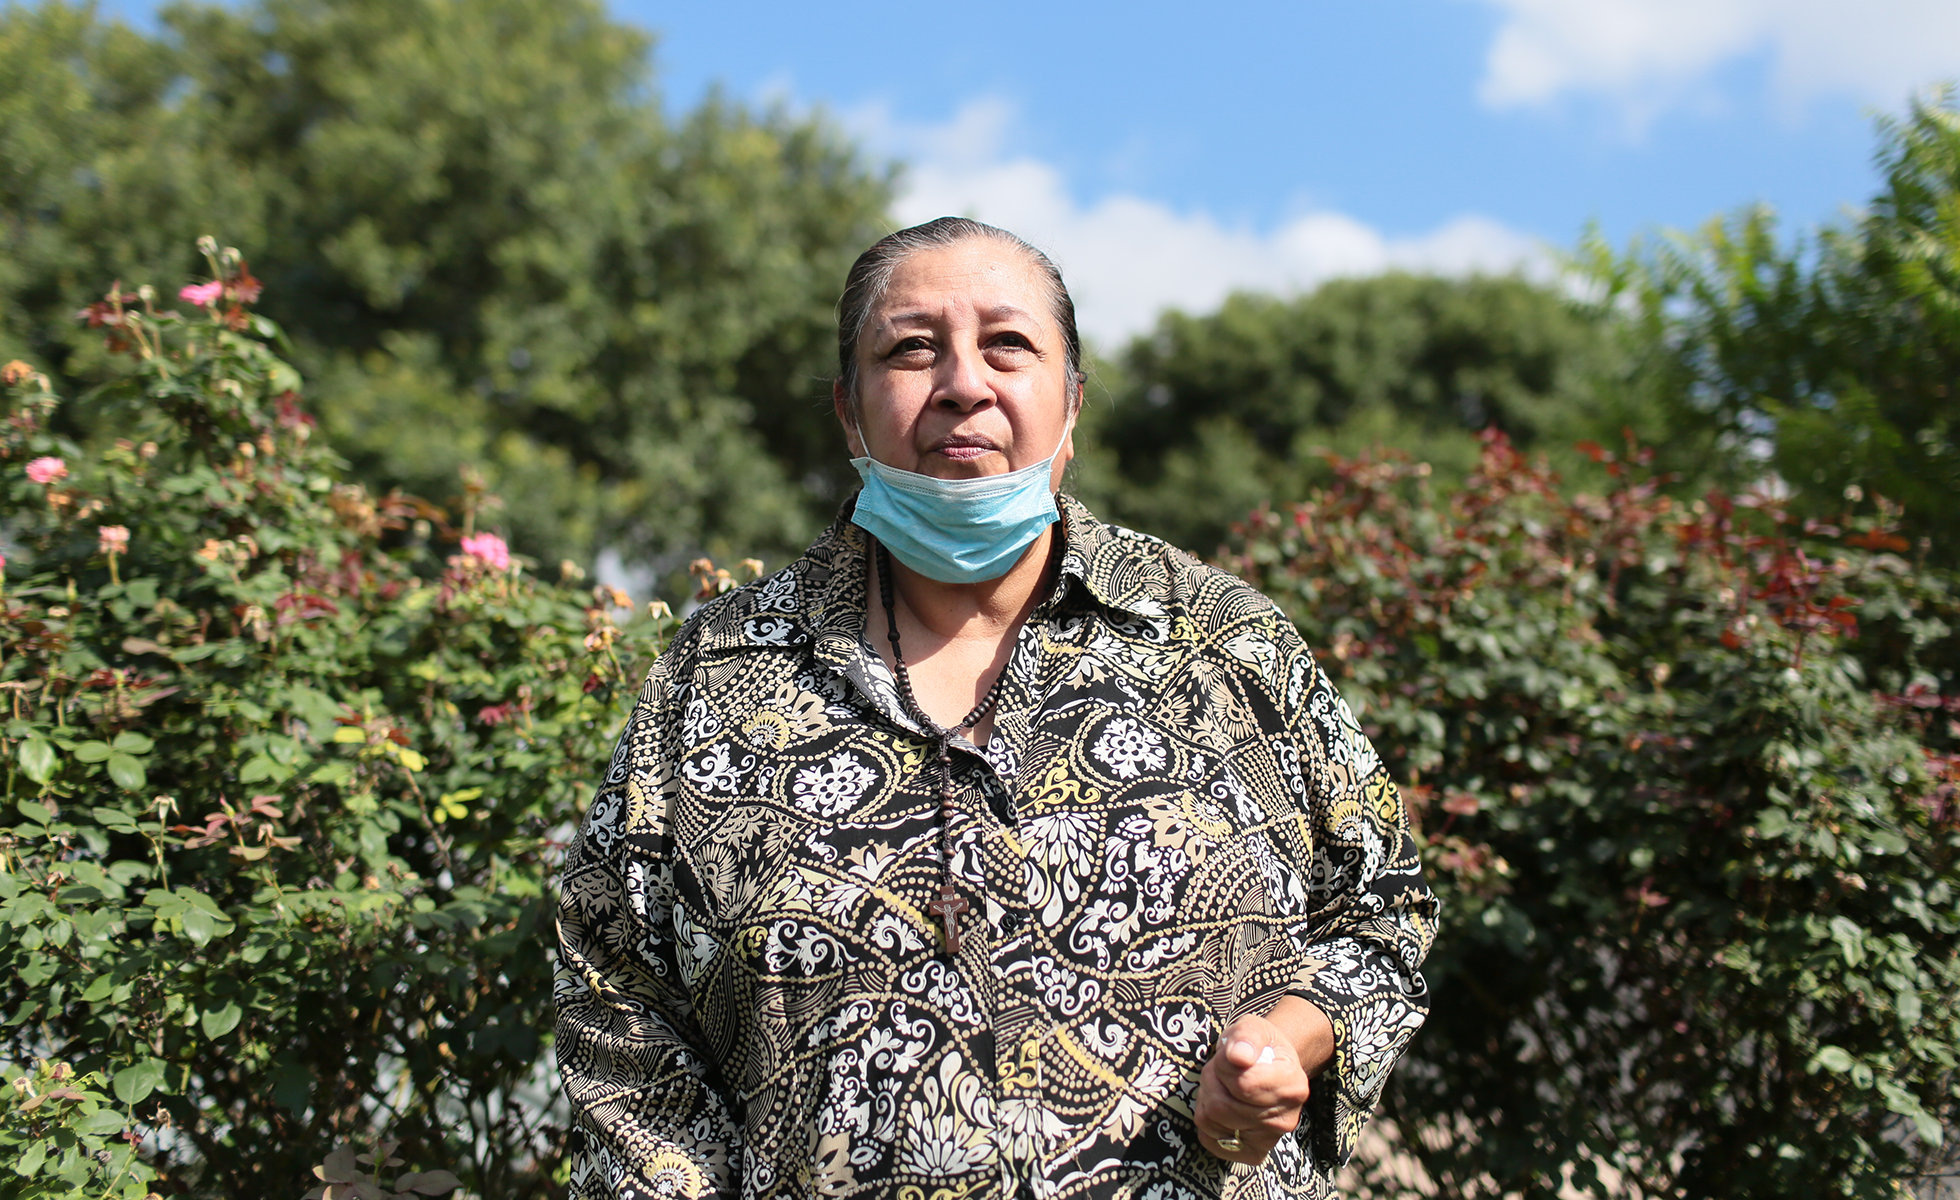 Brenda Ramos in front of the rose bushes her son planted for her outside her home in South Austin.